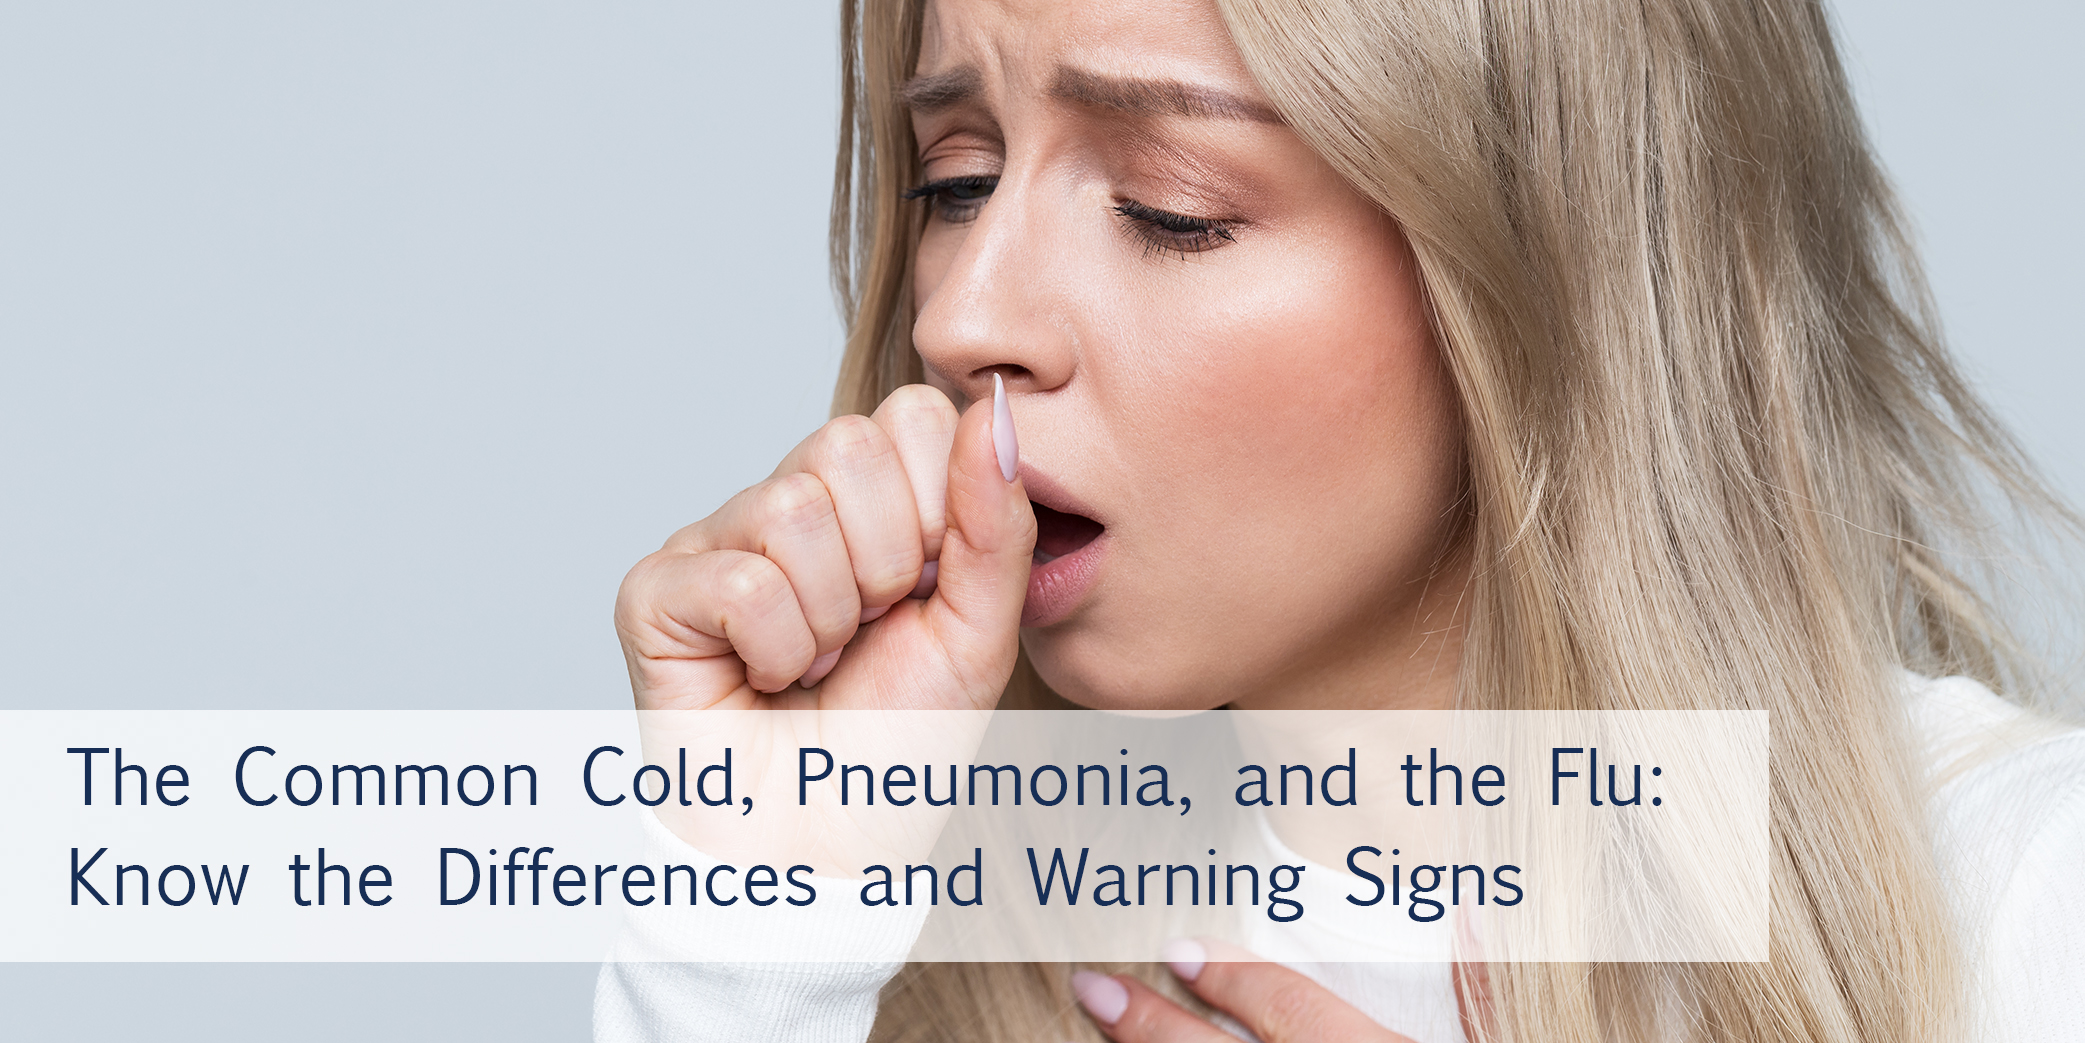 The common cold, pneumonia, and the flu: know the differences and warning signs